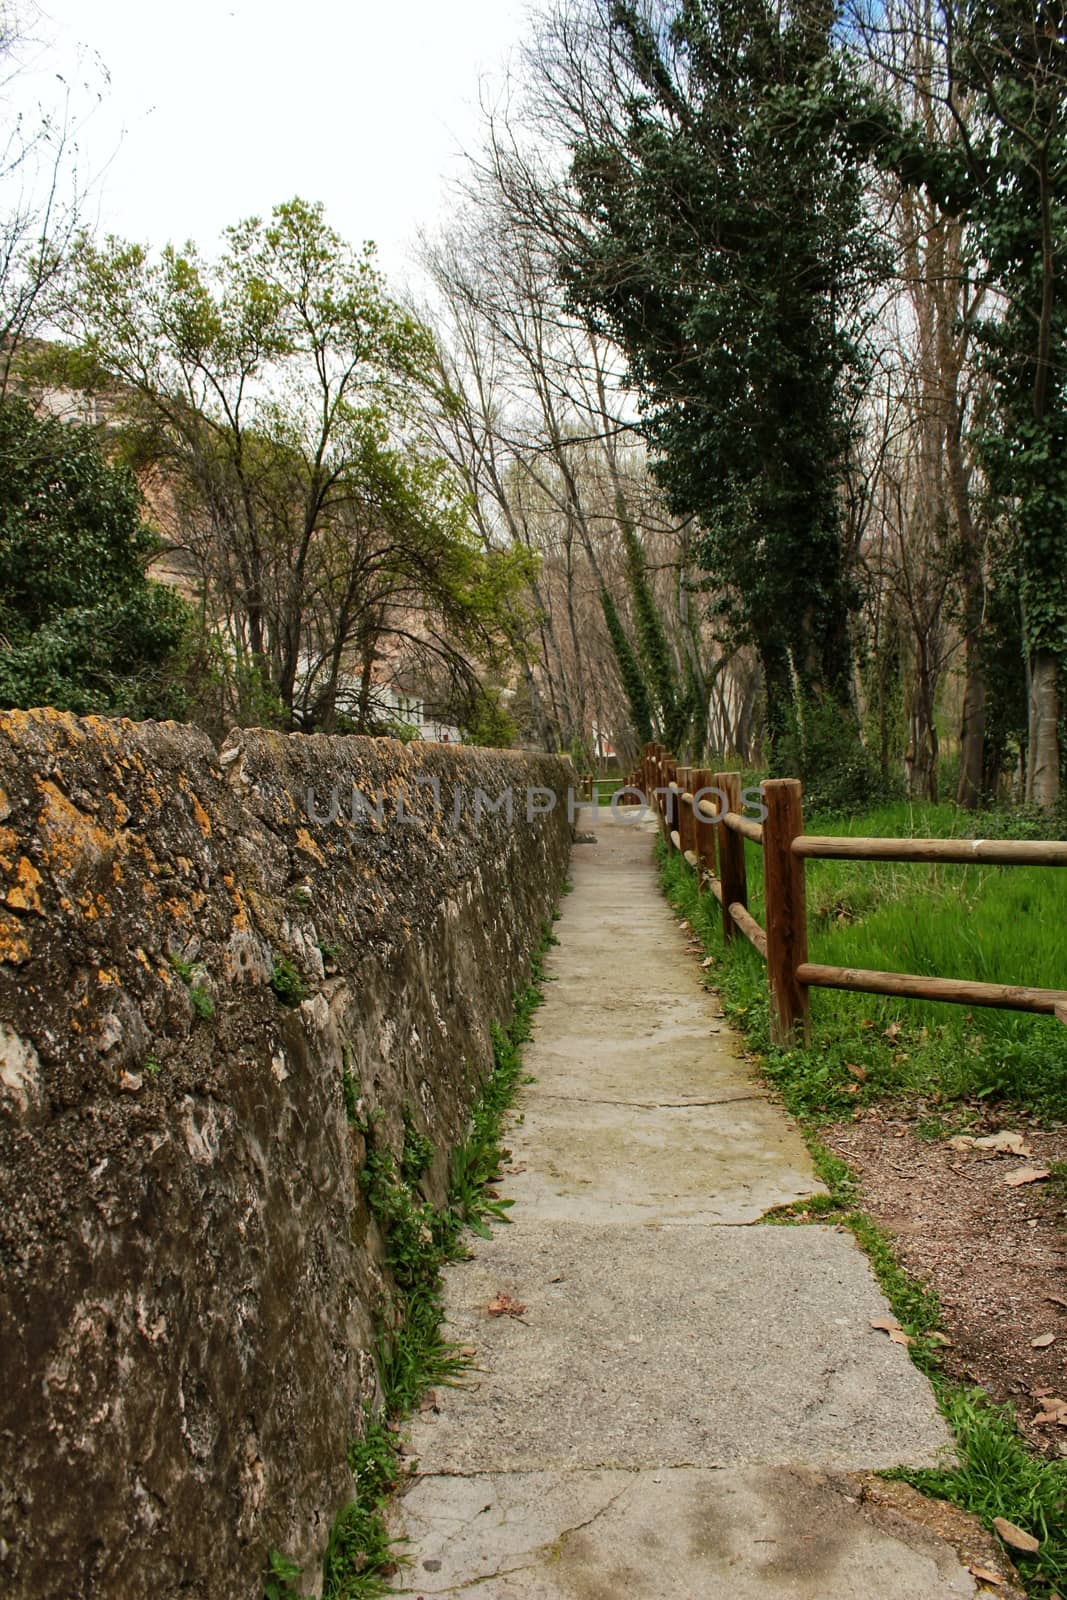 Mountain landscape and path between green vegetation in spring by soniabonet